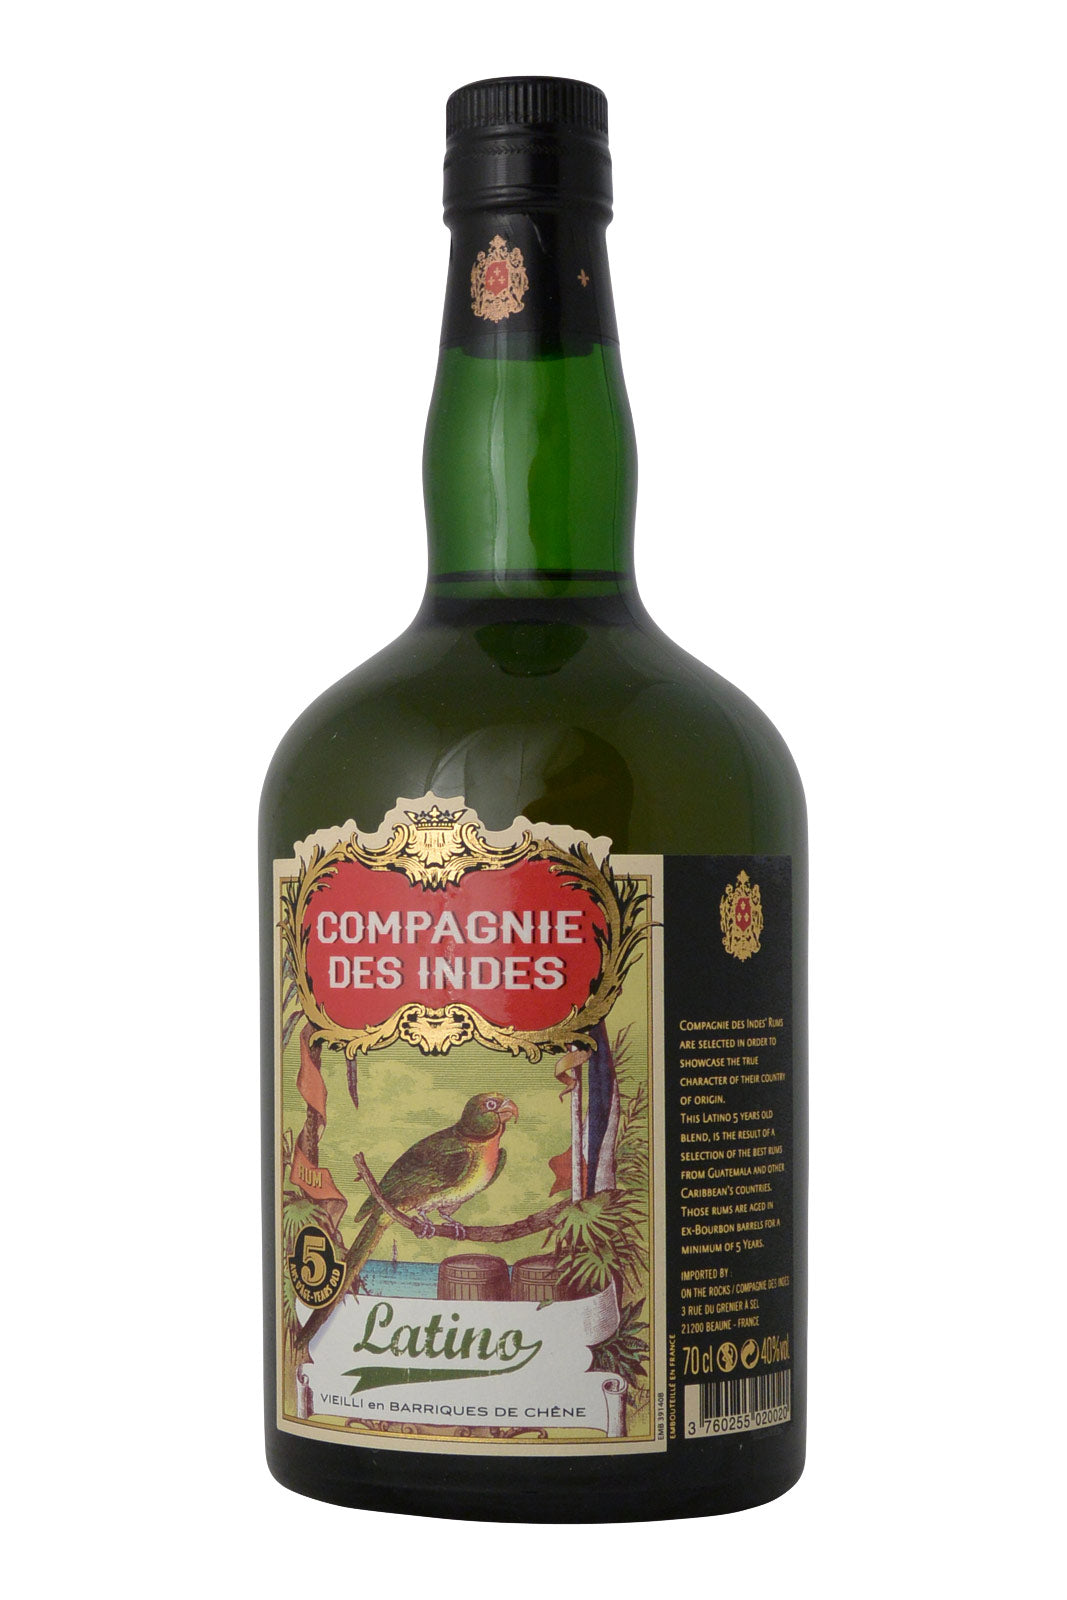 Compagnie des Latino Old Year Blend Indes 5